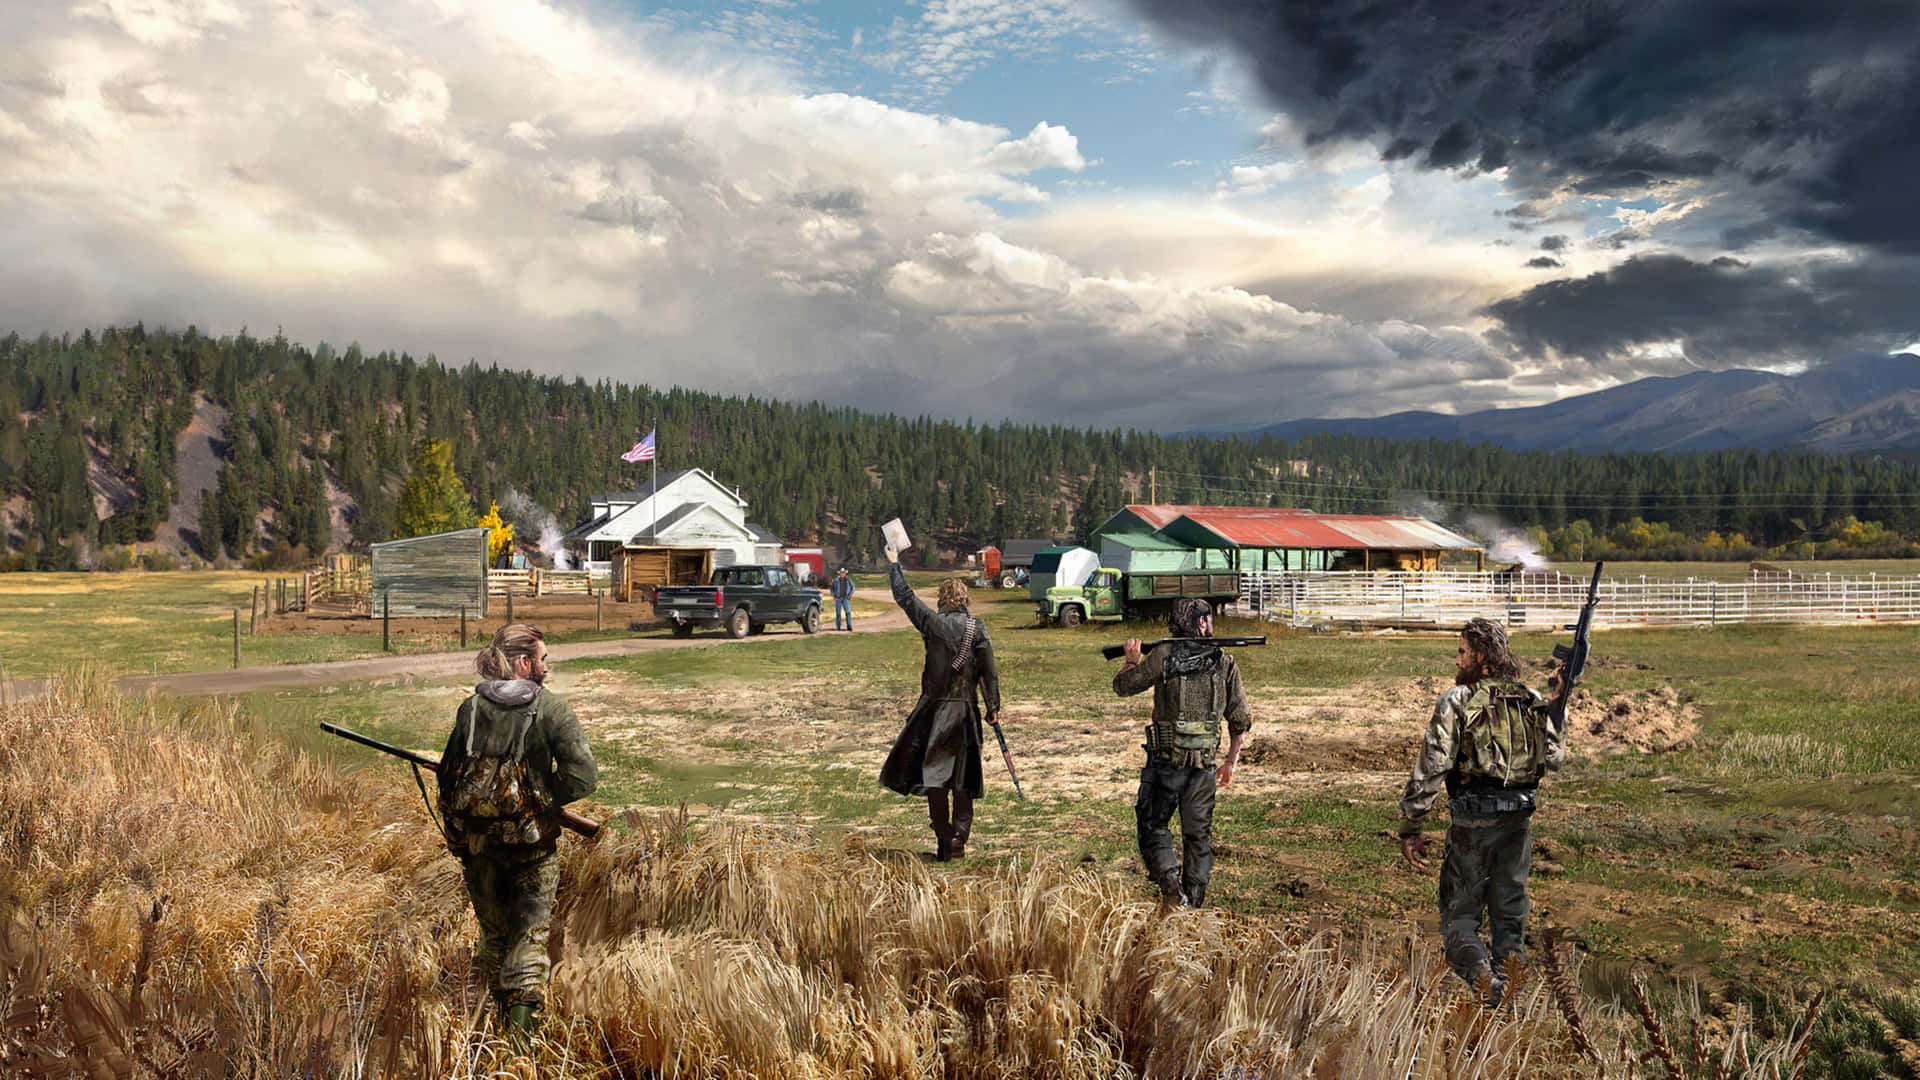 Experience The Stunning Visuals Of Far Cry 5 In 4k Ultra Hd.